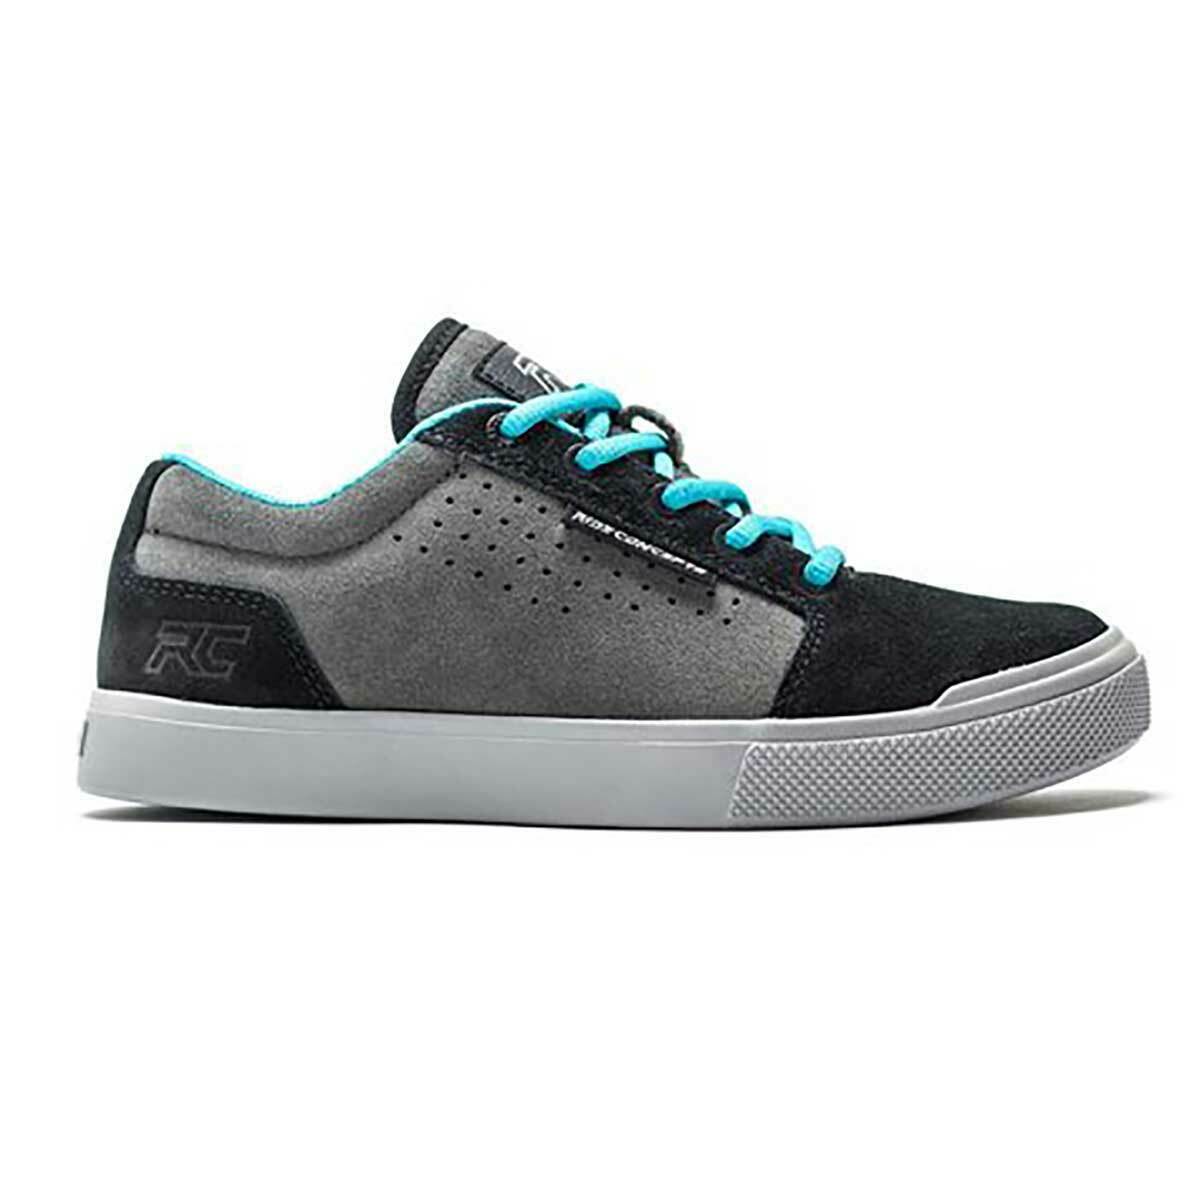 Ride Concepts Youth Vice Charcoal/black 6 2021